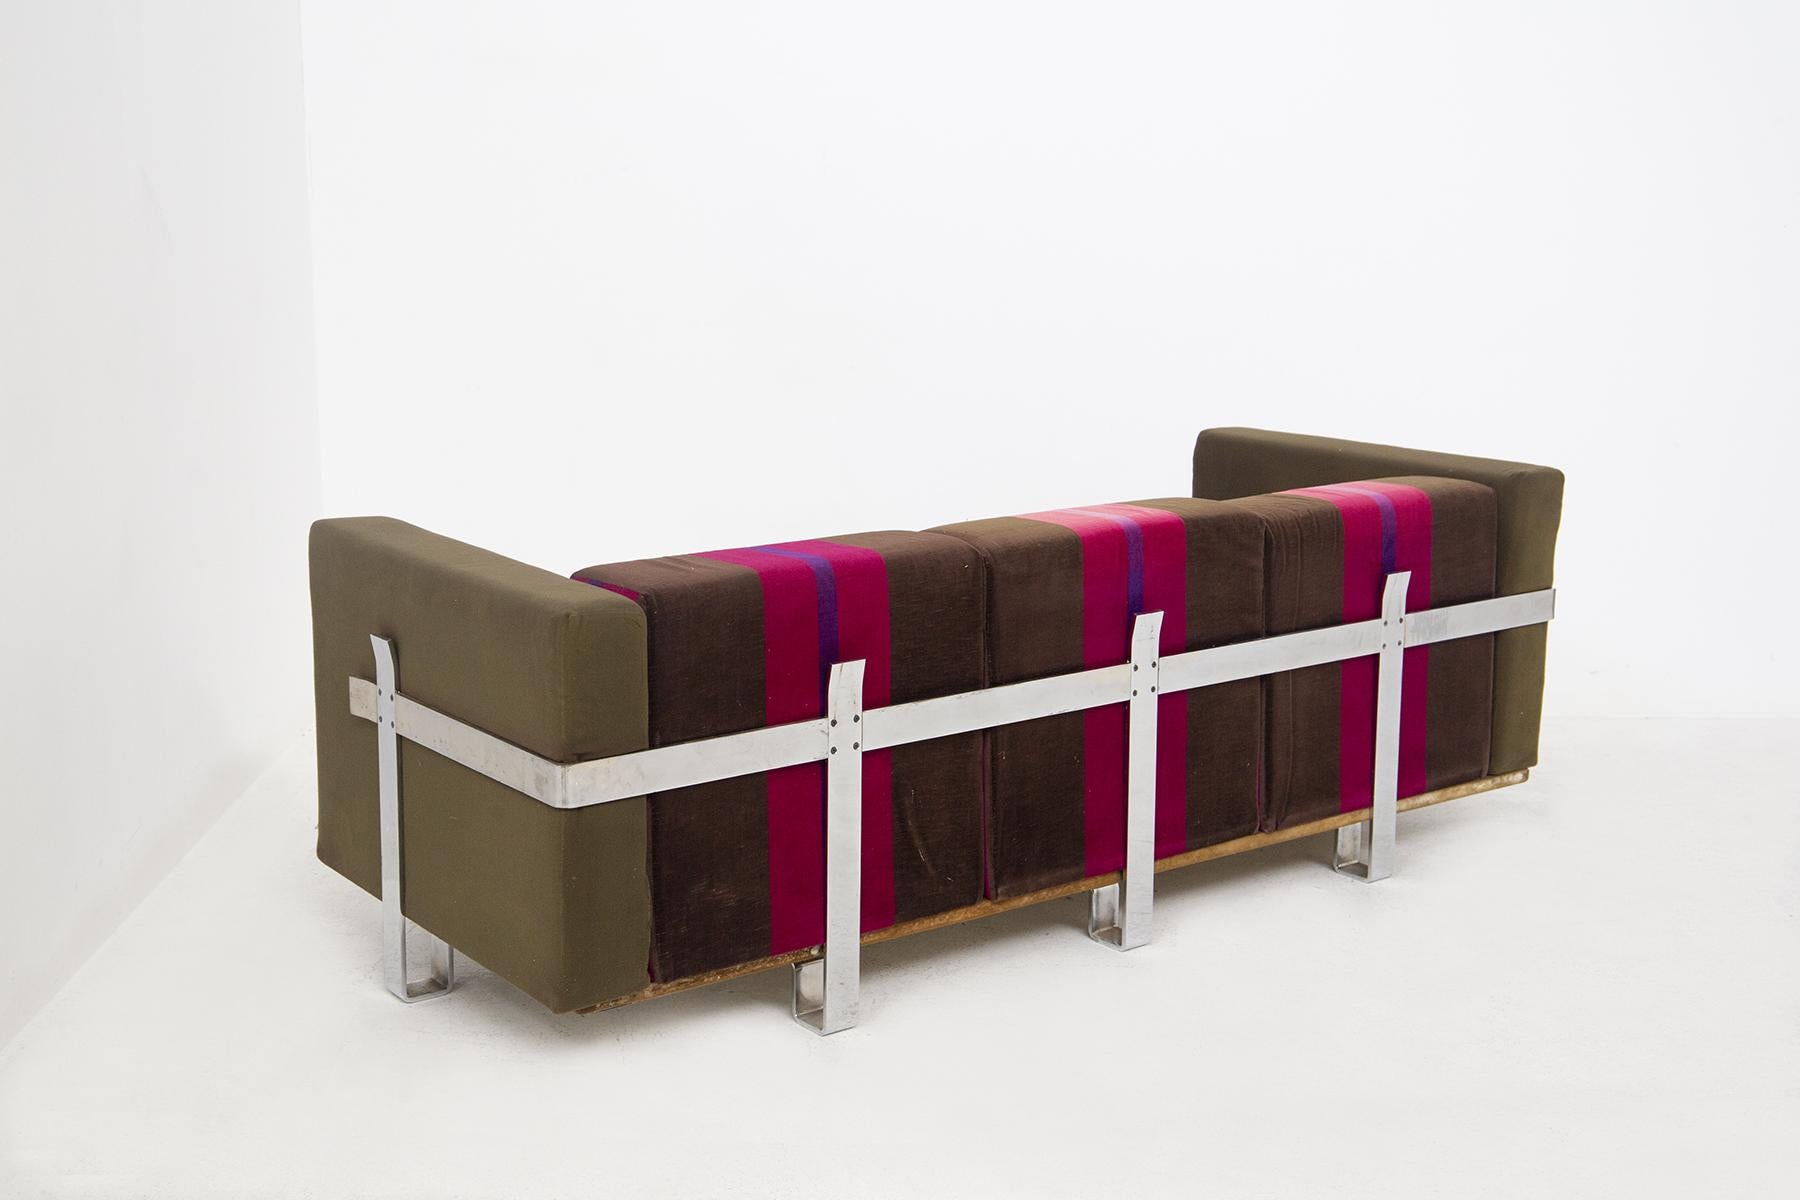 Gorgeous fabric sofa designed by Luigi Caccia Dominioni for the fine manufacturer Azucena Italia.
The vintage sofa is made of brown, fuchsia and purple striped fabric, which creates a very colorful geometric effect. The lines are very hard and